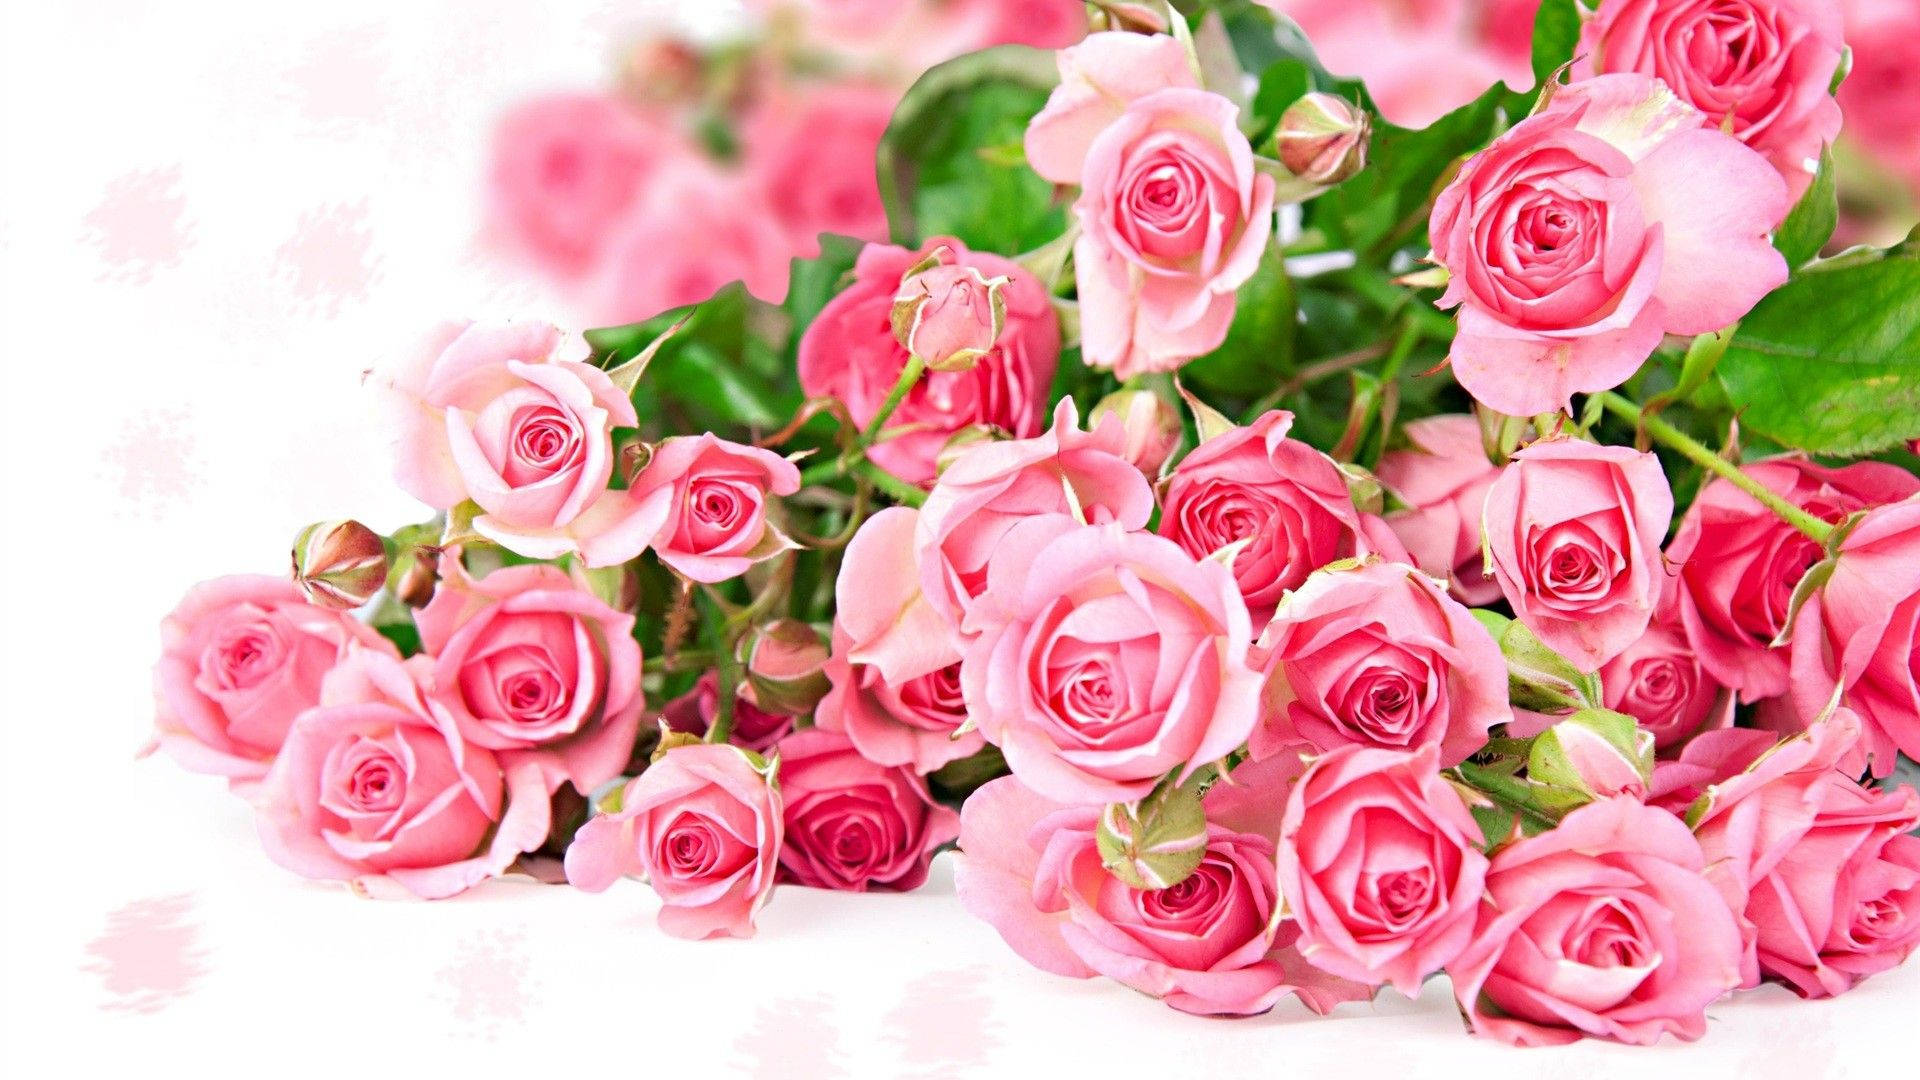 Cute Pink Flower Buds Of Roses Background